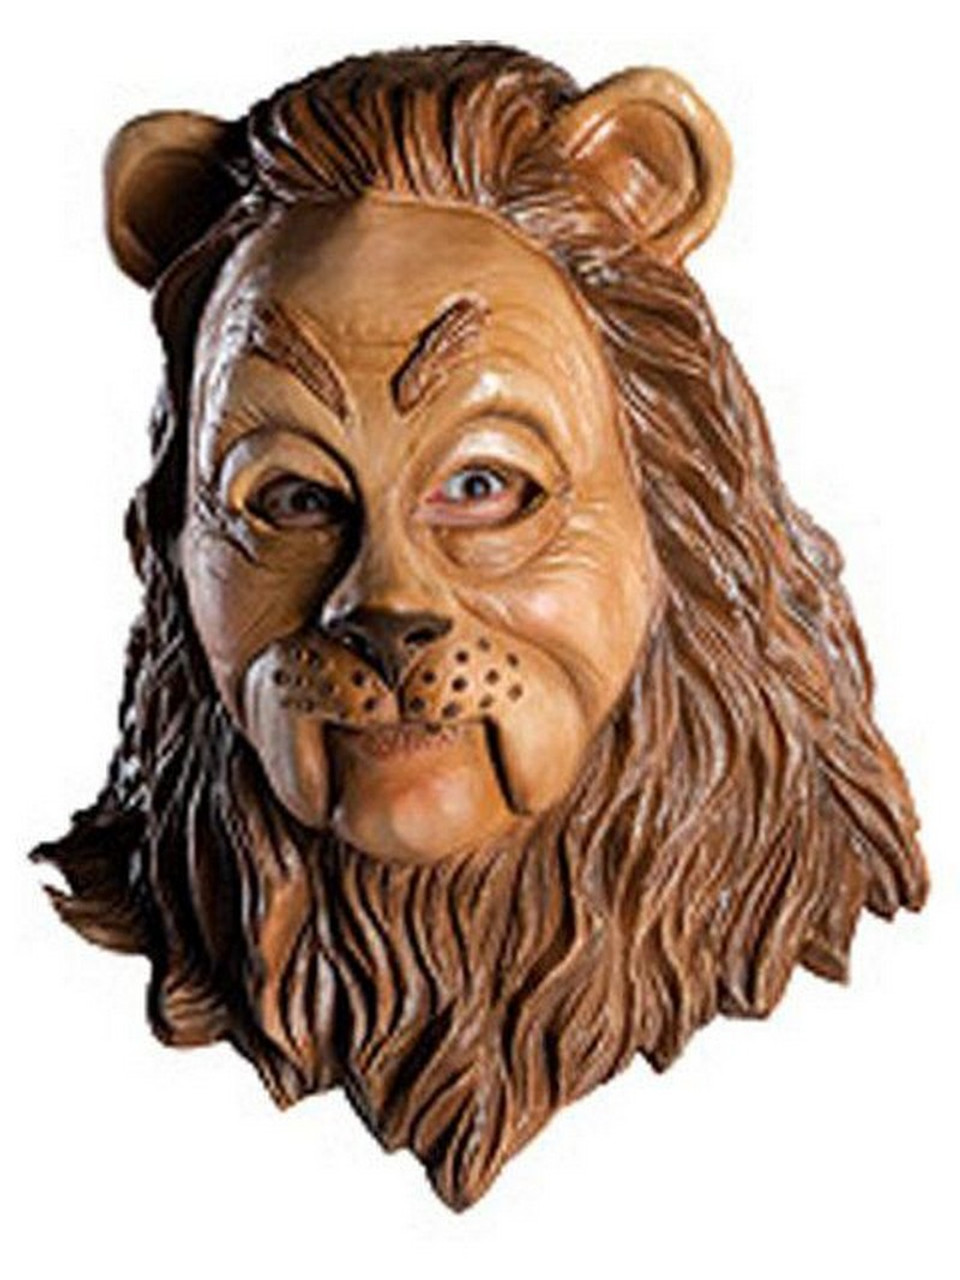 Deluxe Cowardly Lion Wizard of Oz Mask